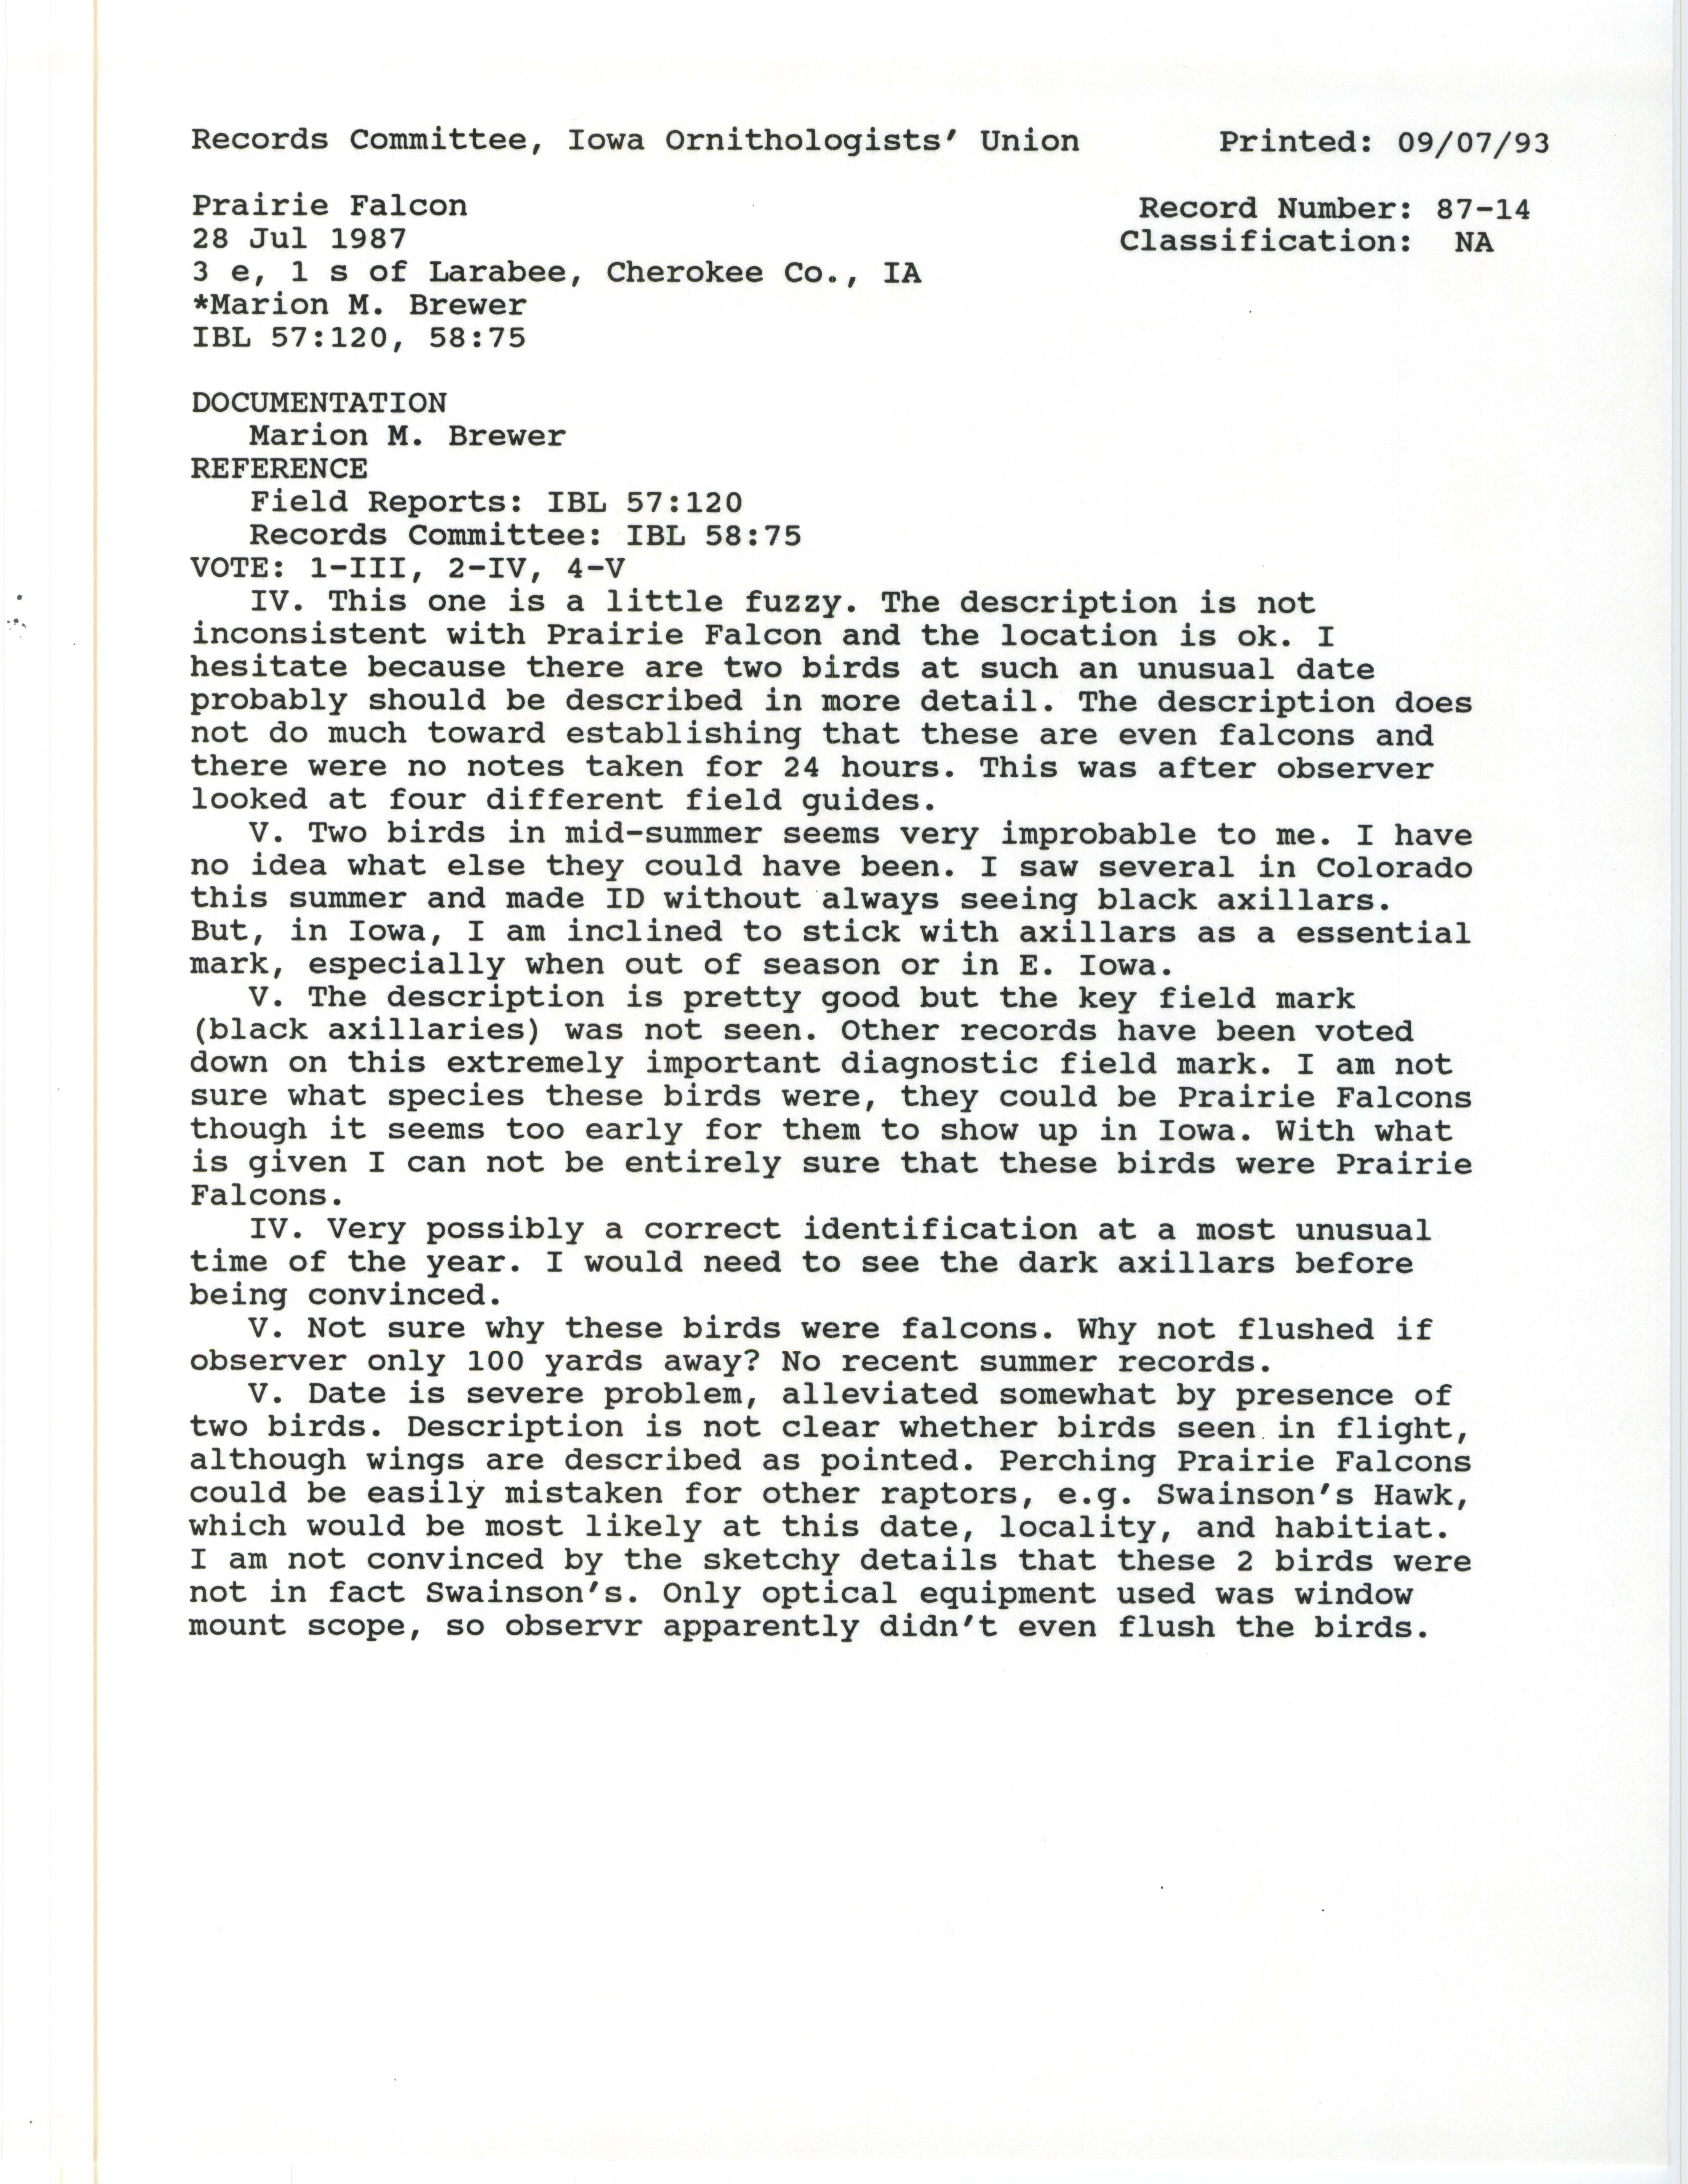 Records Committee review for rare bird sighting of Prairie Falcon southeast of Larrabee, 1987